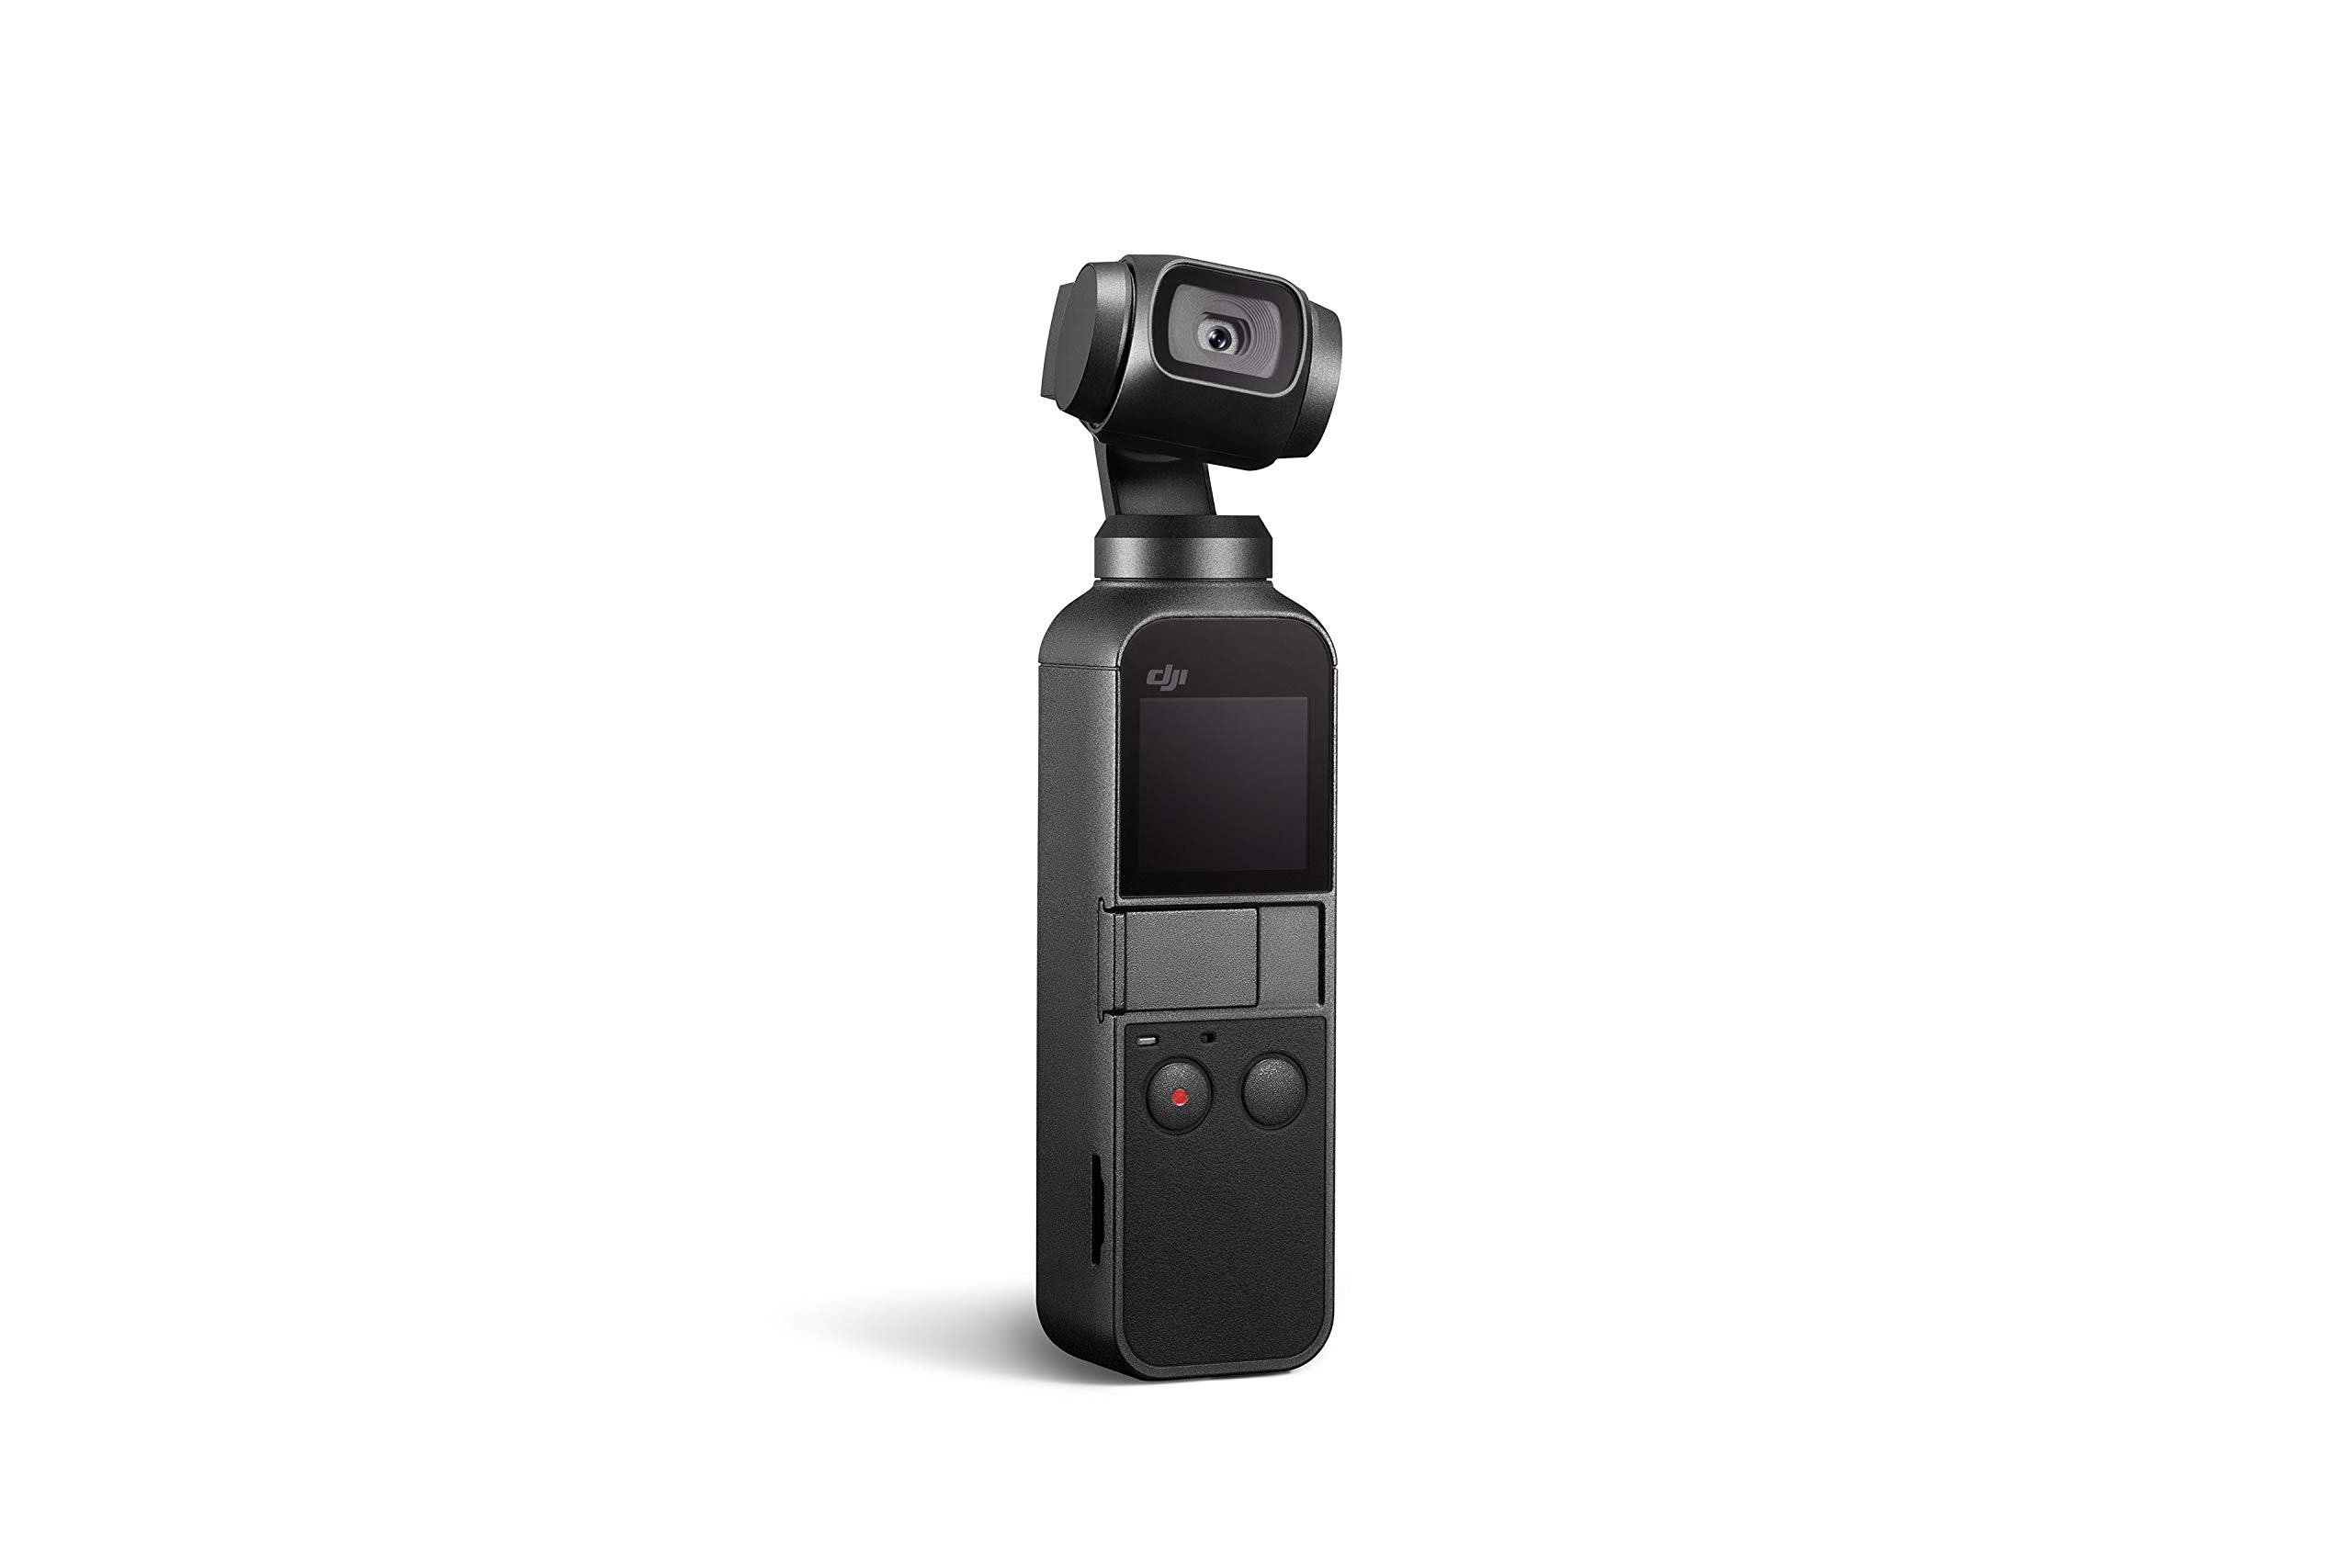 DJI Osmo Pocket - Handheld 3-Axis Gimbal Stabilizer wit...